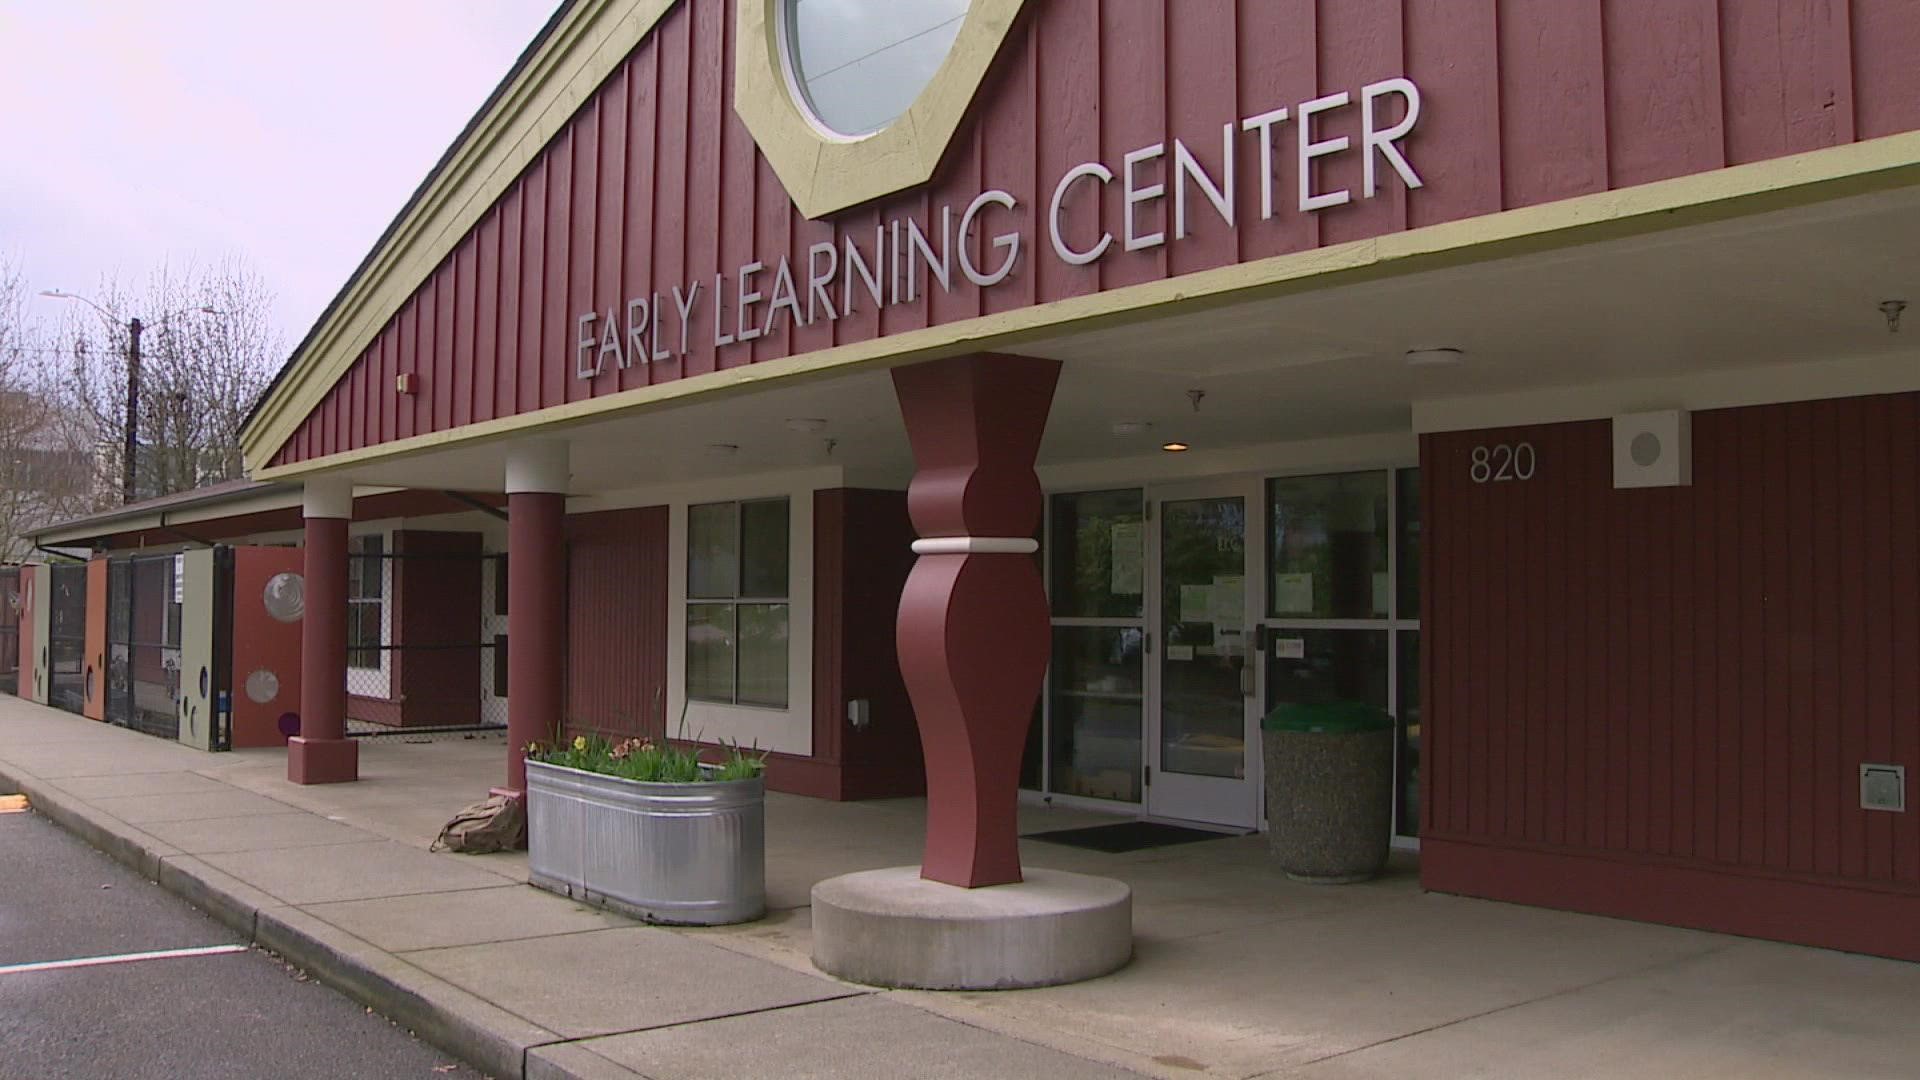 Amid a significant shortage of child care in Washington, the Early Learning Center will remain open through at least 2023.